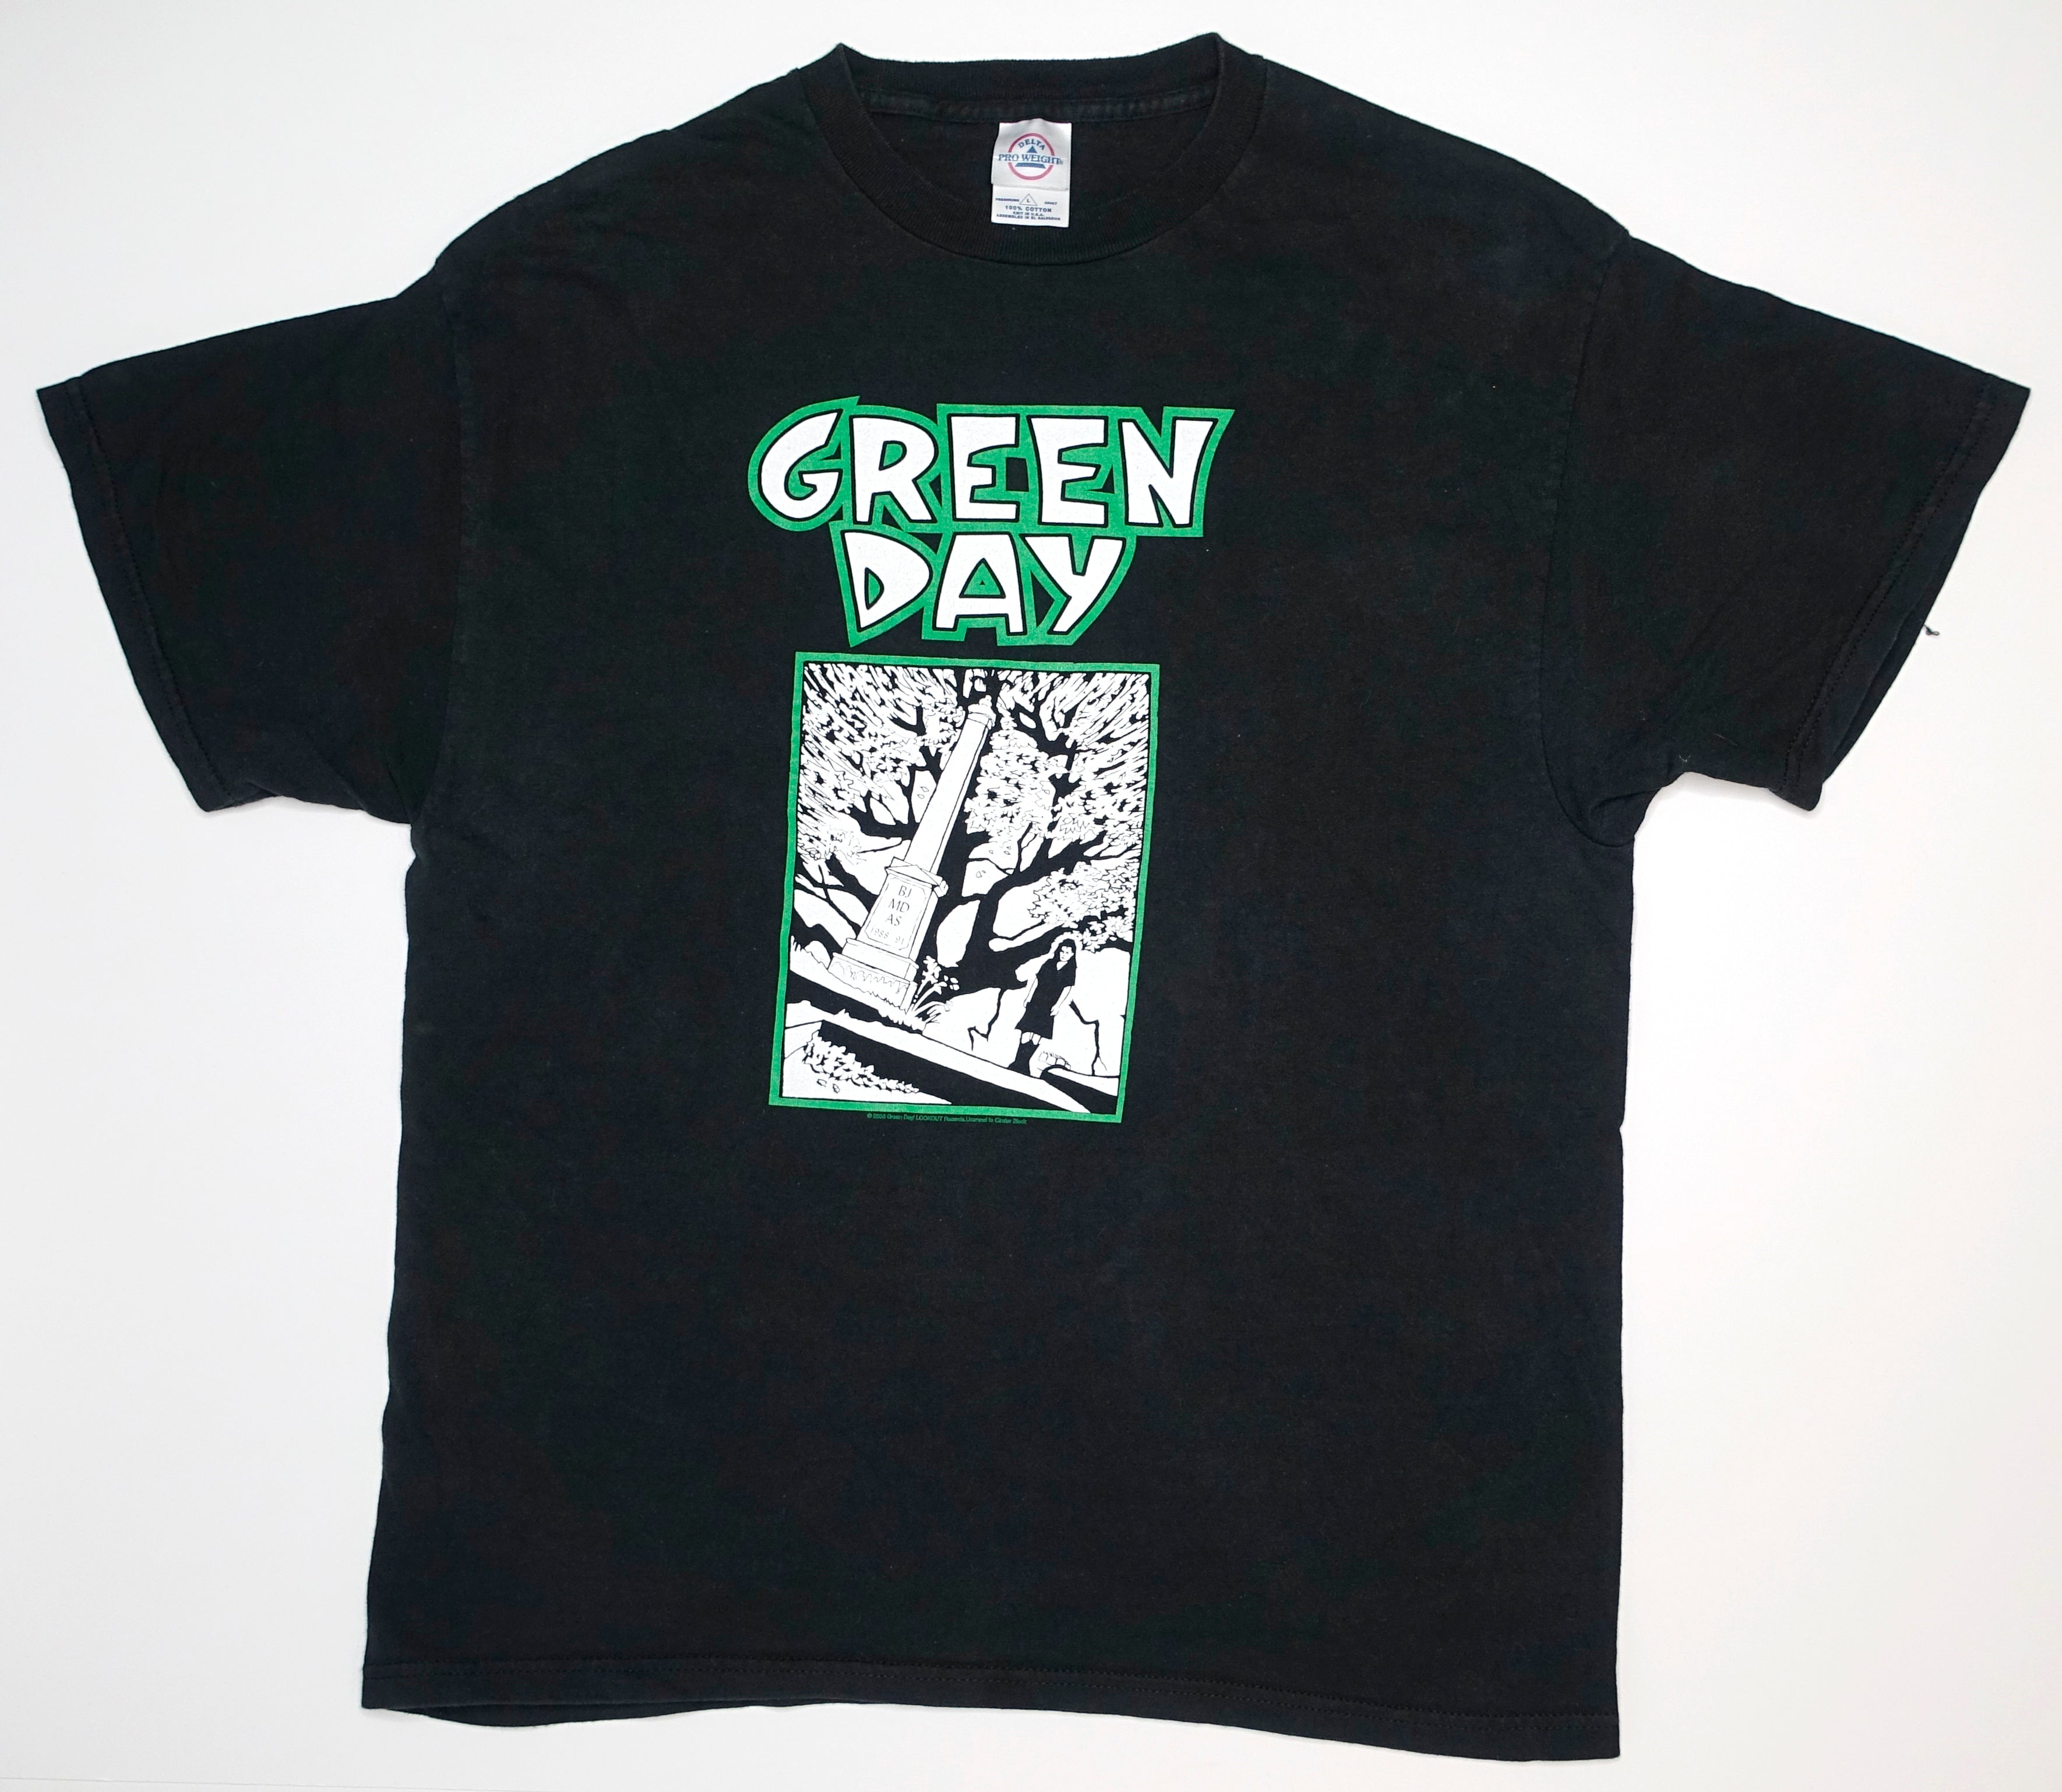 Green Day - 39/Smooth 2004 Shirt (Delta) Size Large